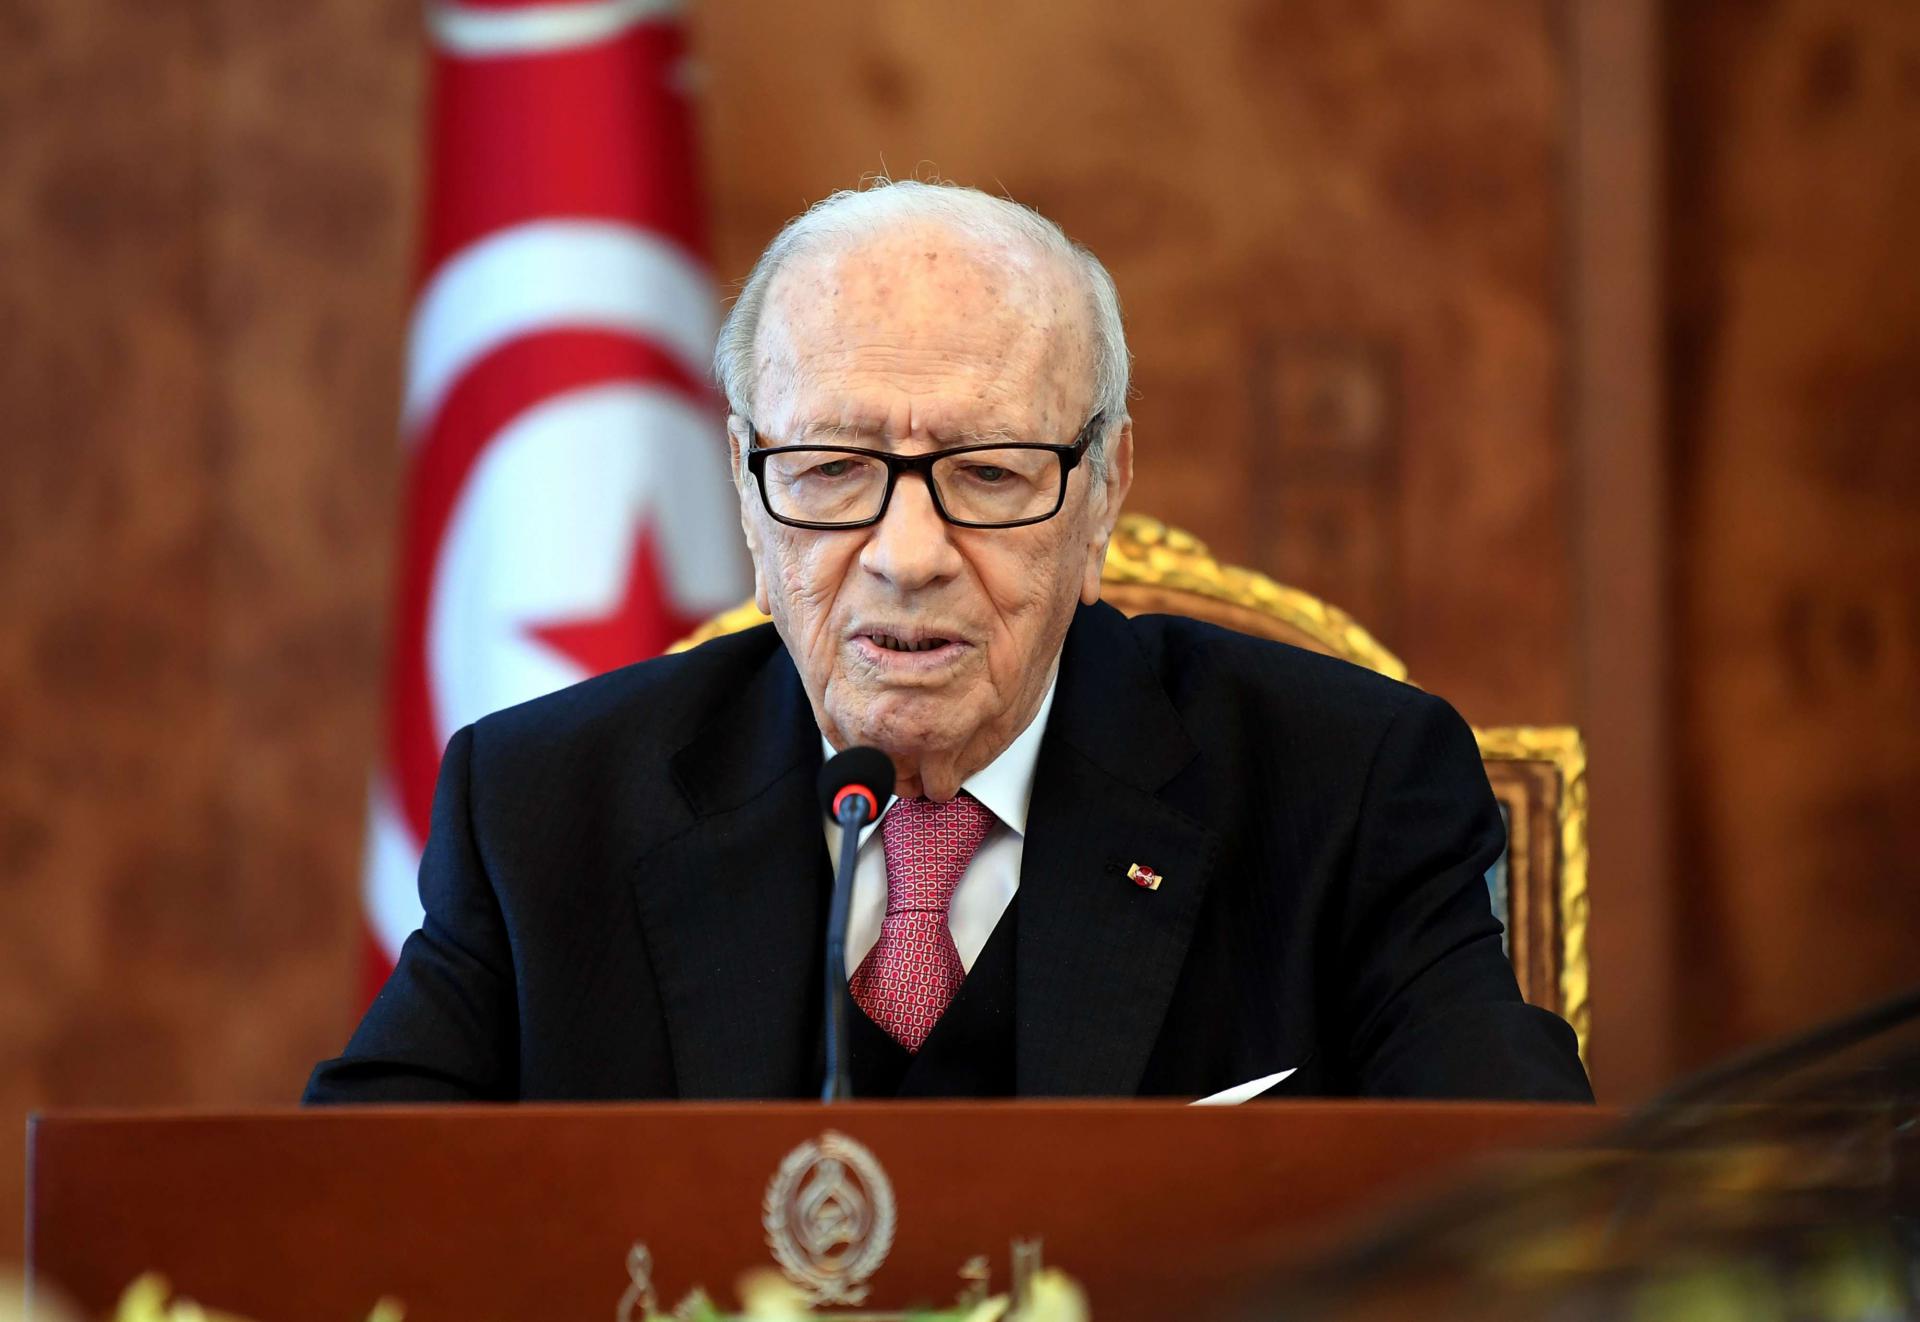 Tunisian President Beji Caid Essebsi attends a meeting with political parties, unions and employers on January 13, 2018 in Tunis, following unrest triggered by austerity measures.